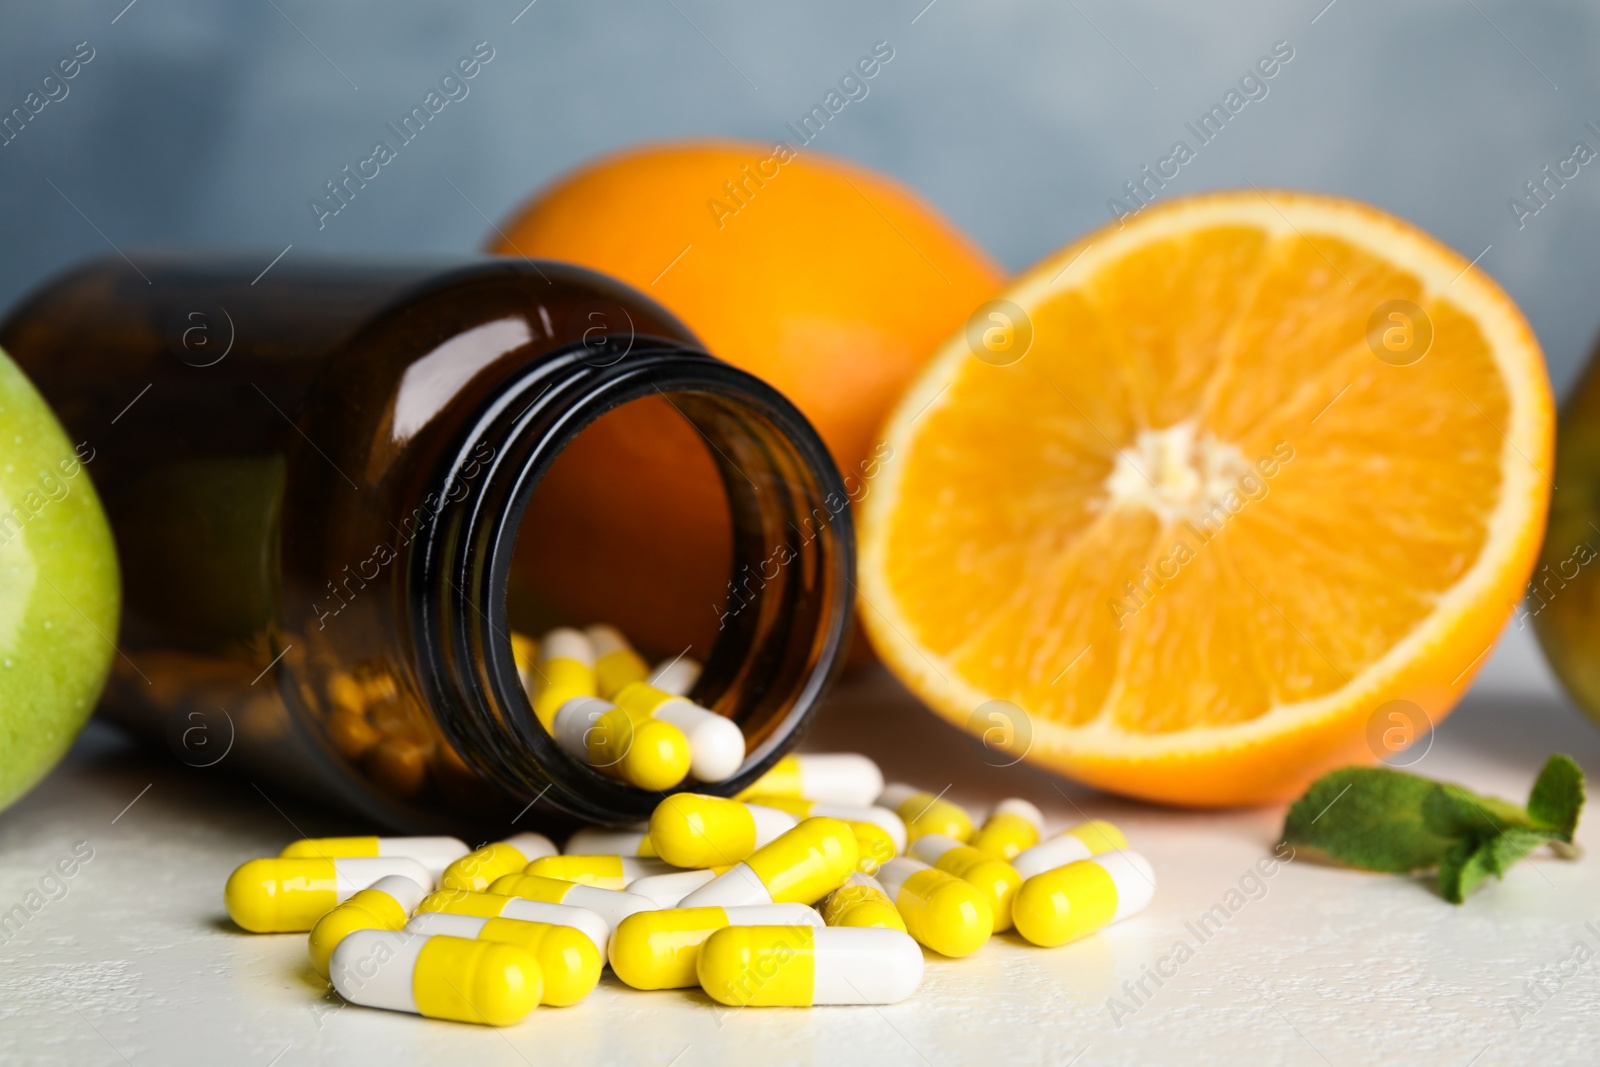 Photo of Bottle with vitamin pills and fruits on white table, closeup